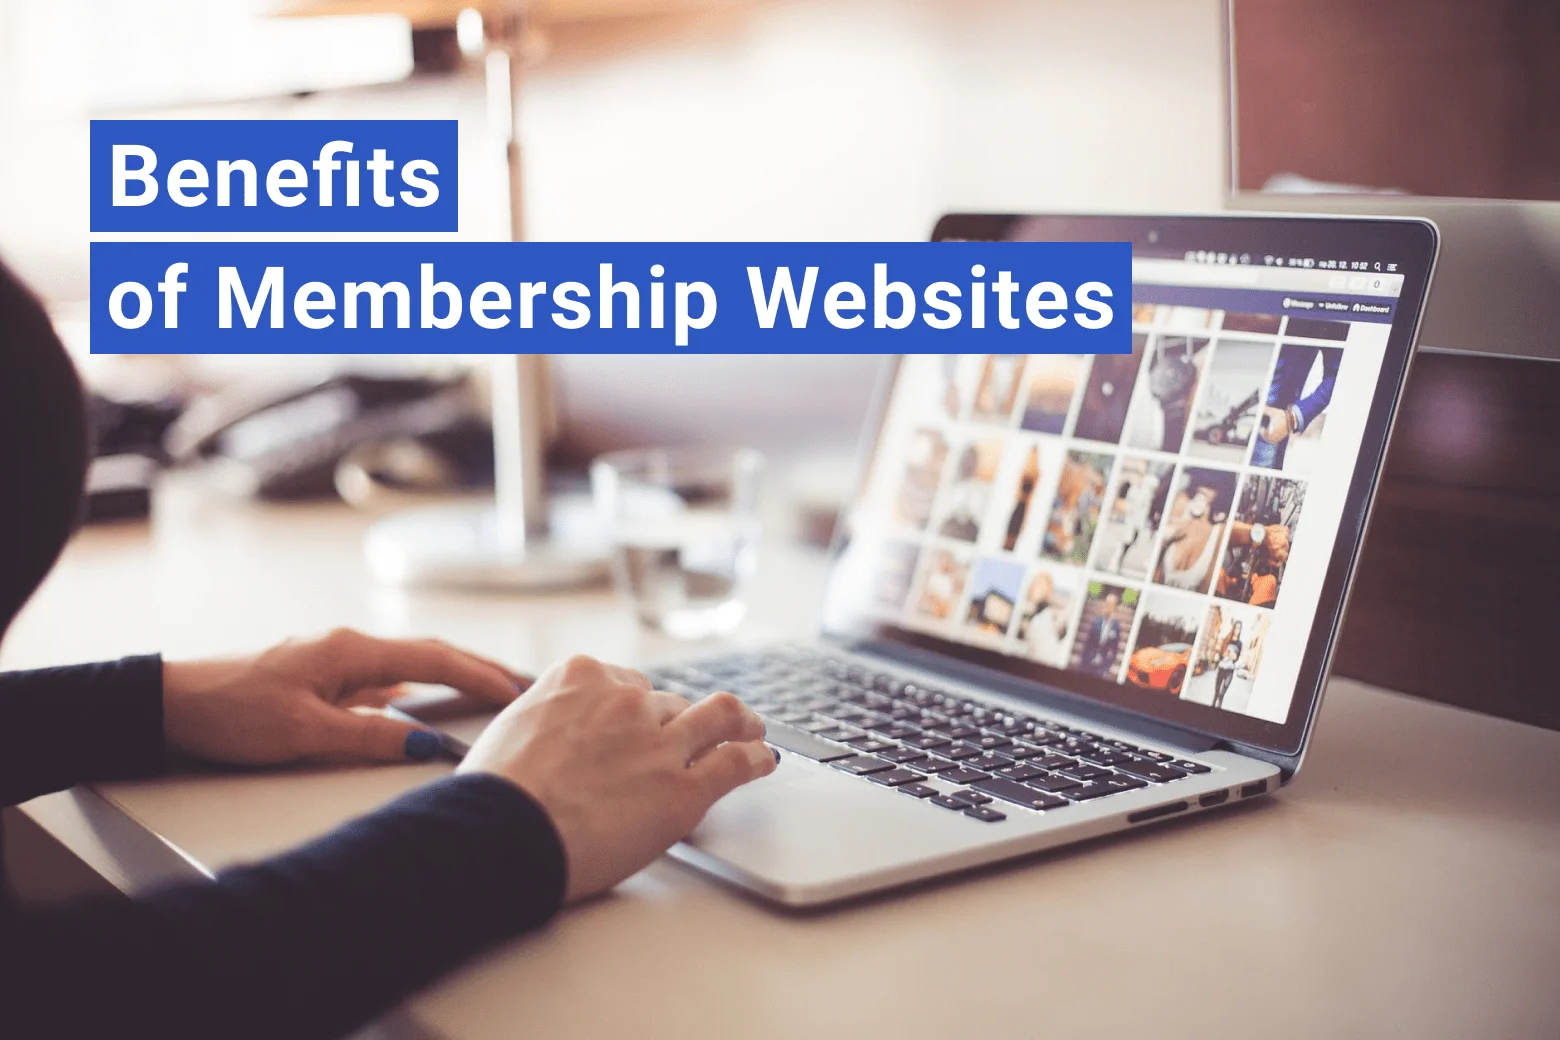 Benefits of starting your own site with membership software